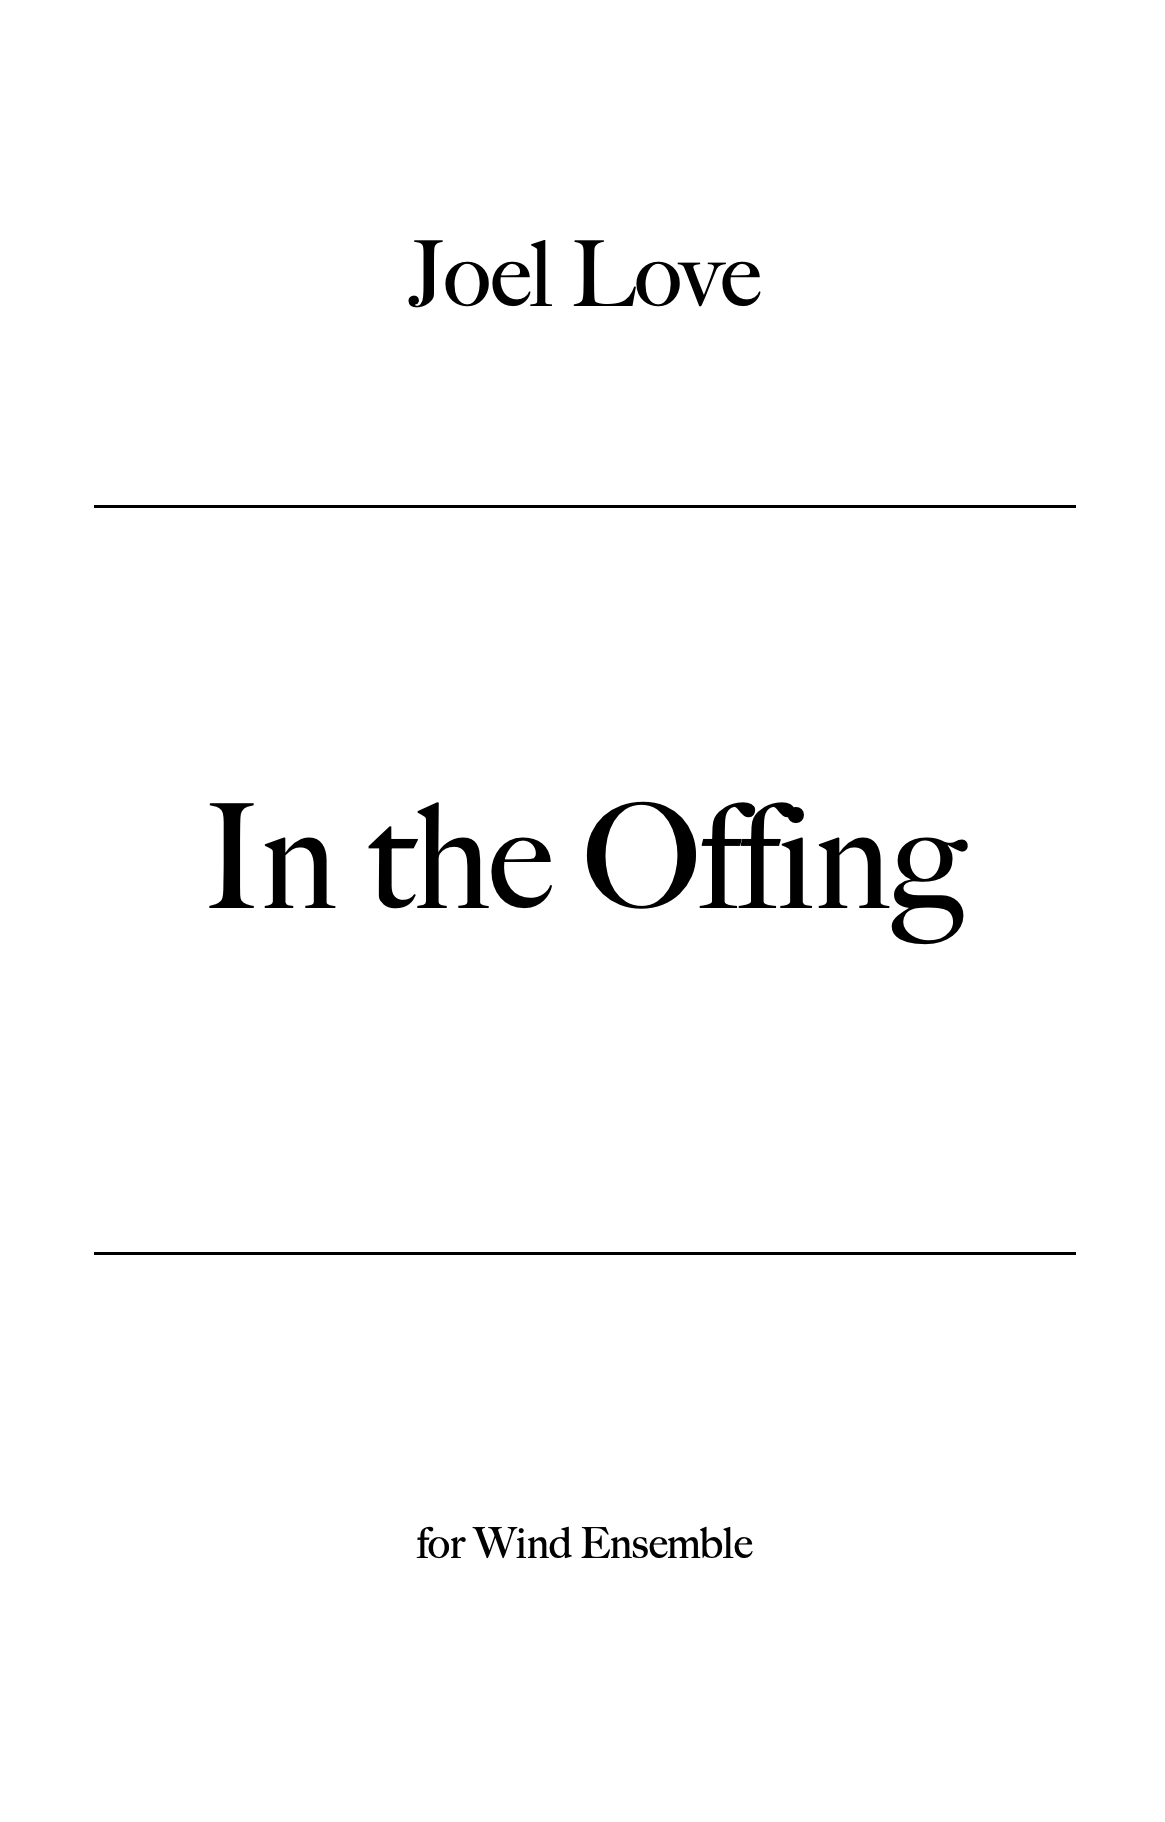 In The Offing (Score Only) by Joel Love